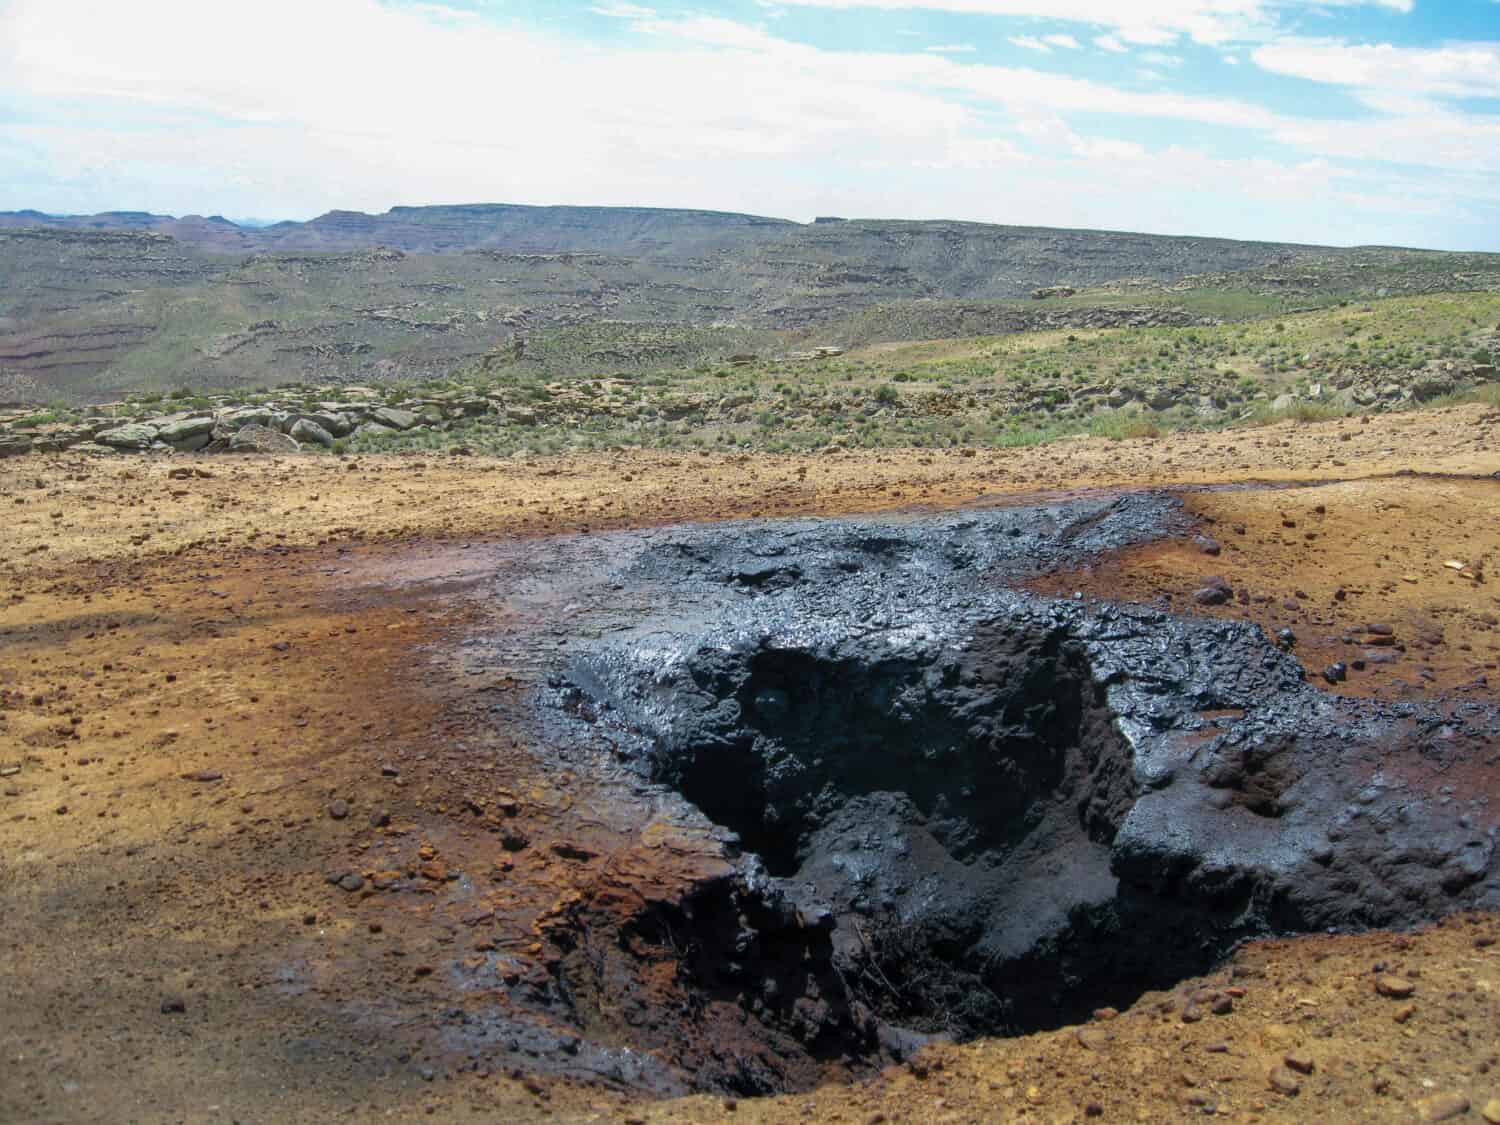 A fuming ground fissure vents noxious gas from an underground coal seam fire on Smoky Mountain, UT. The gas leaves black petroleum deposits around the vent.